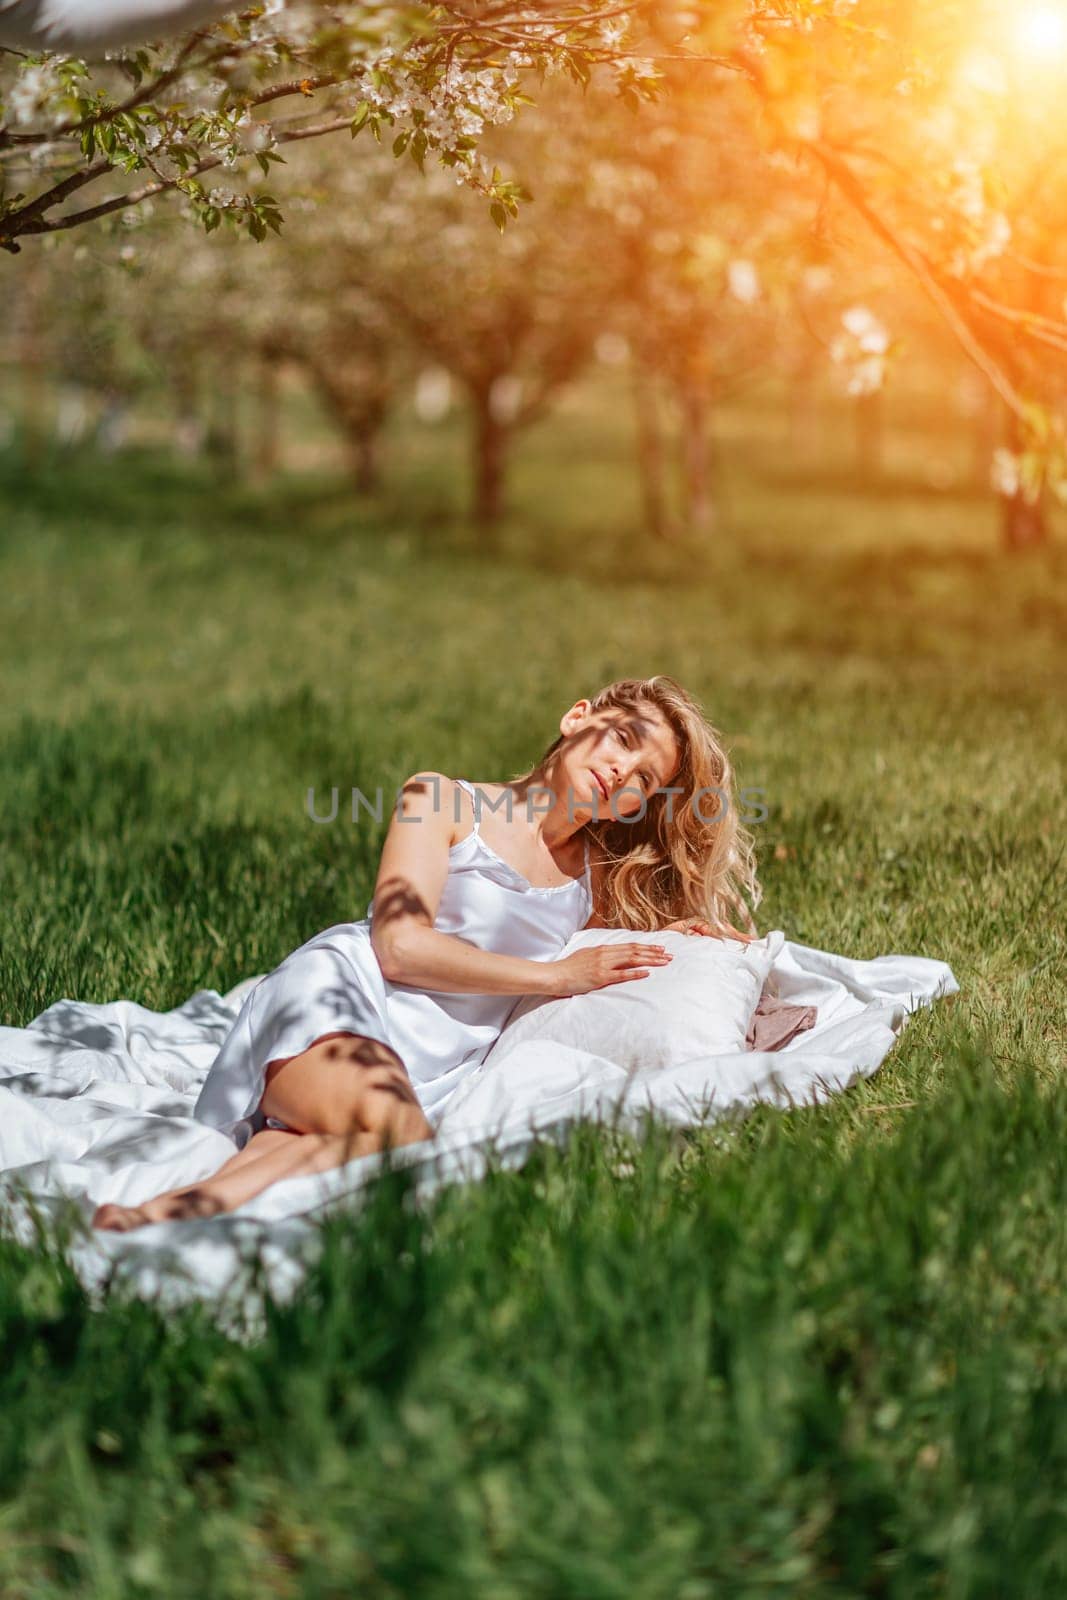 woman garden. she sleeps on a white bed in the fresh spring grass in the garden. Dressed in a blue nightgown. by Matiunina